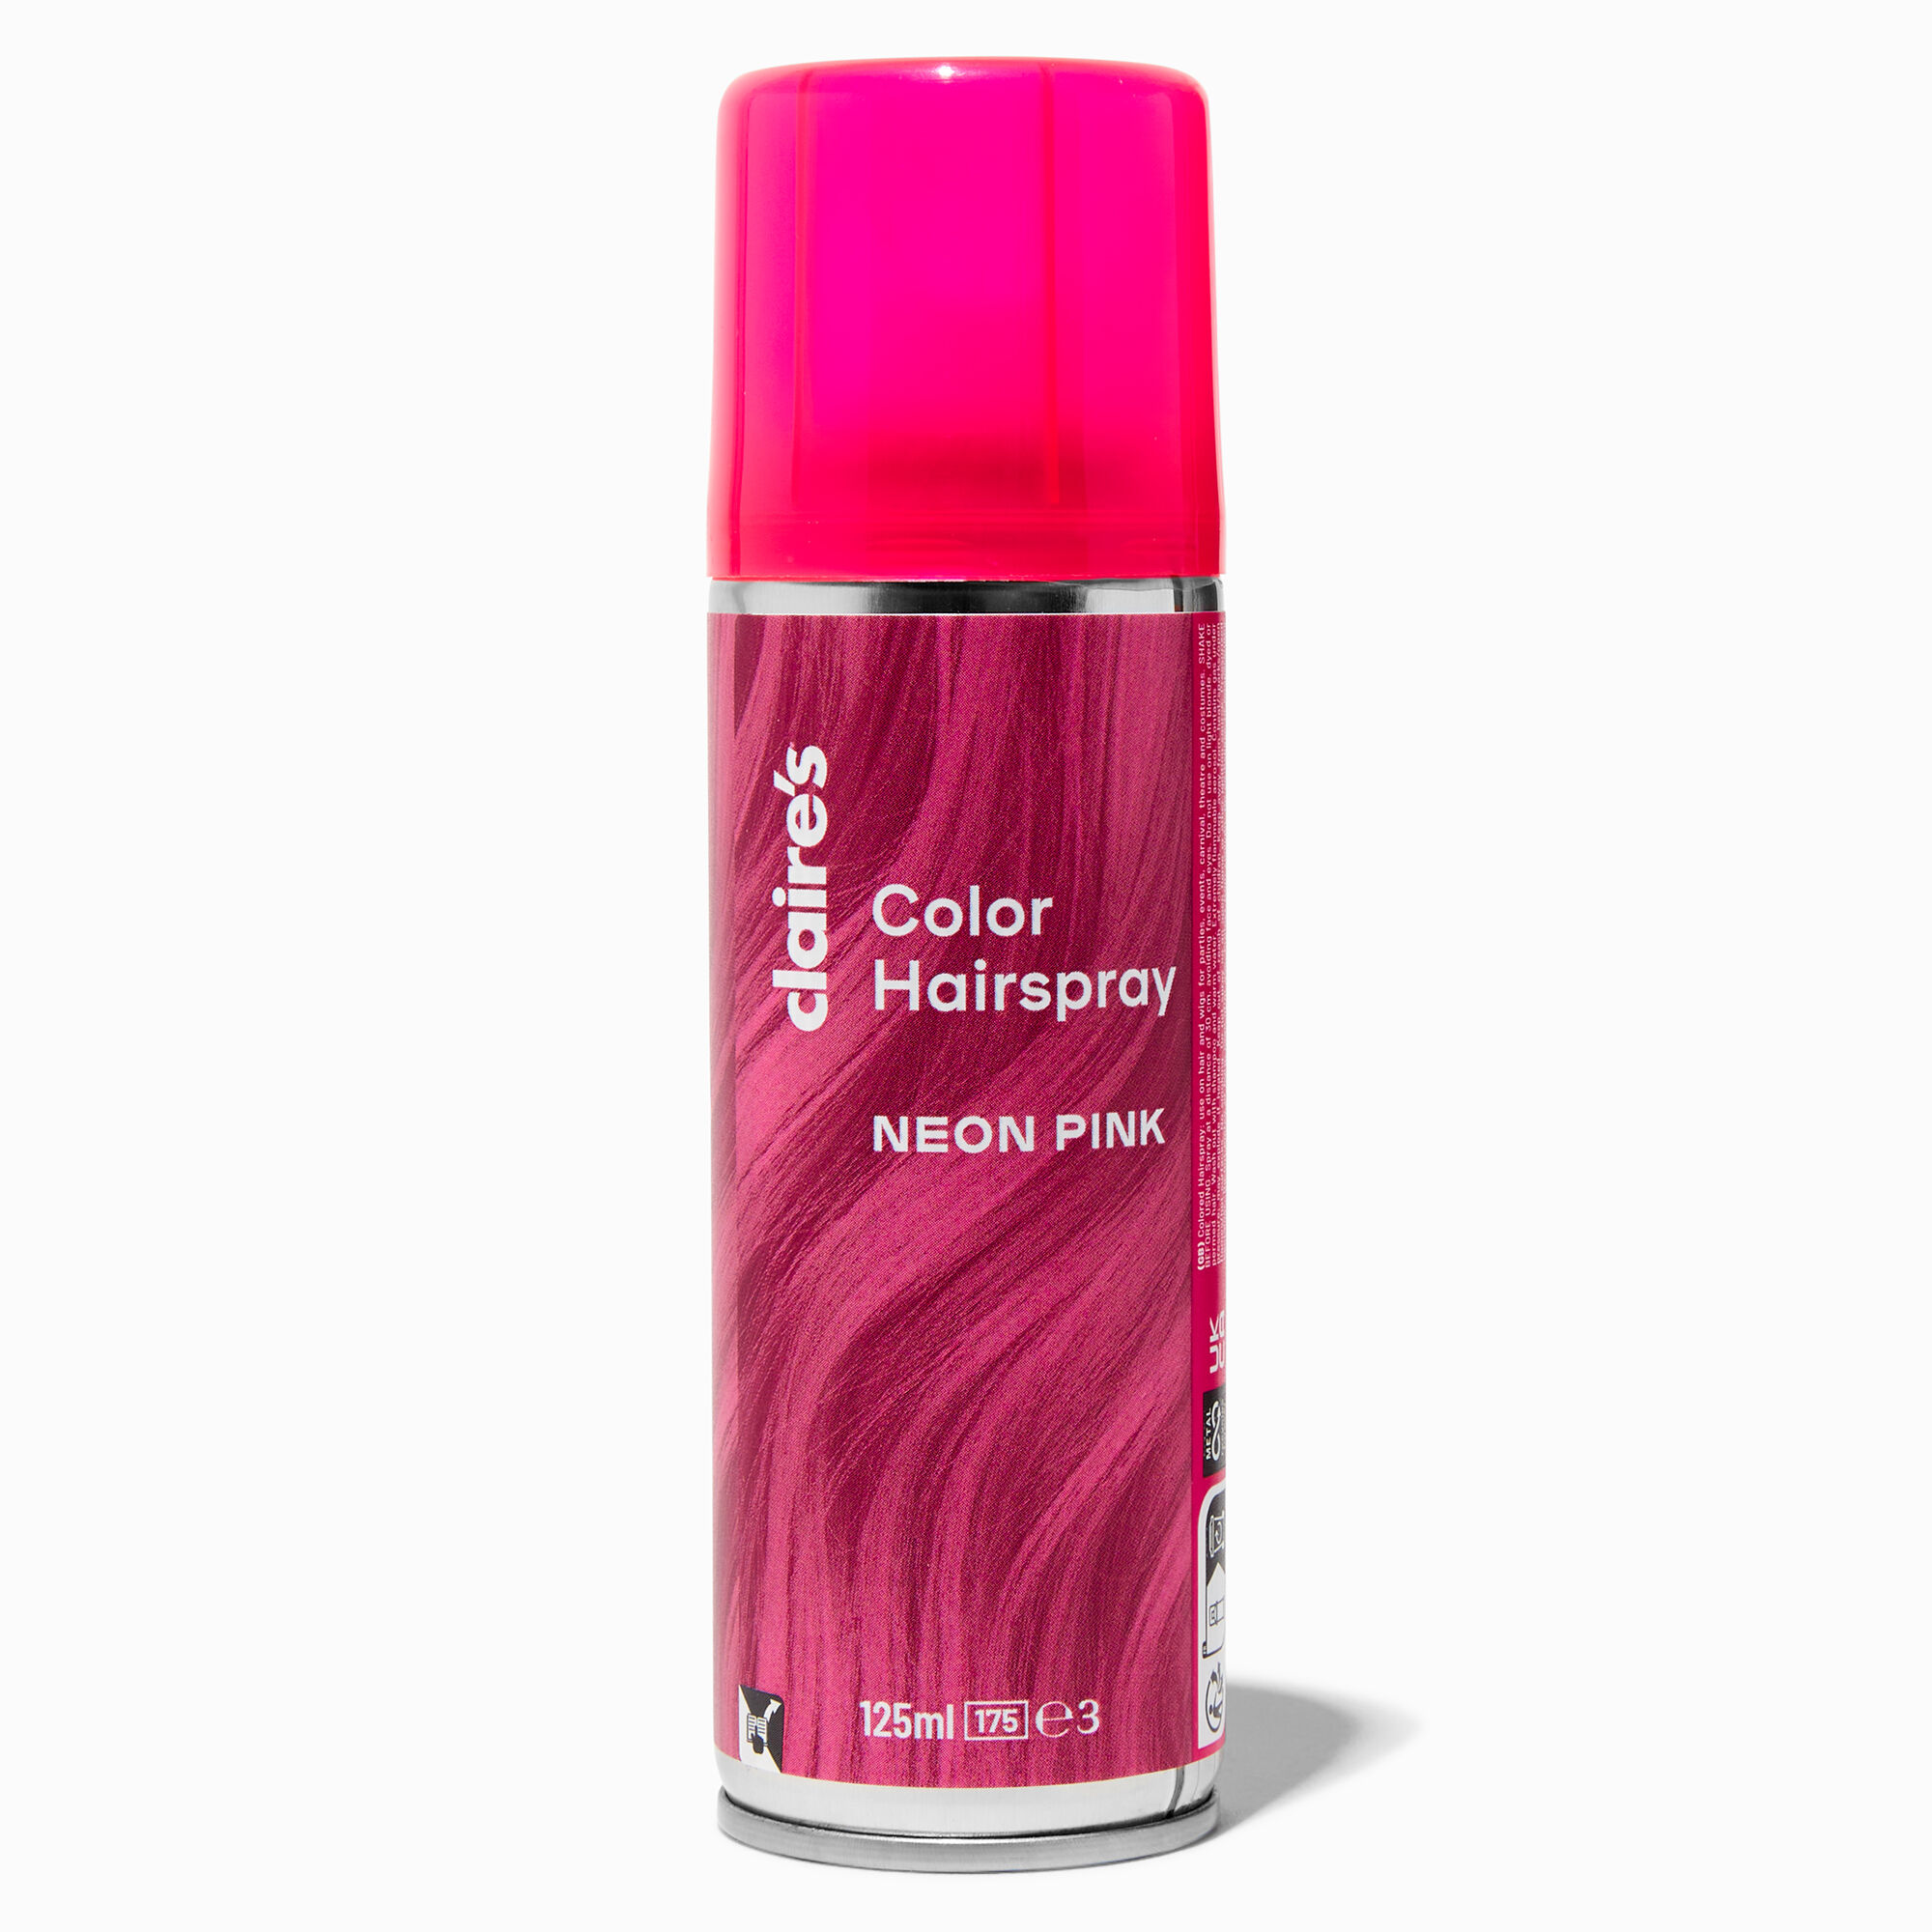 View Claires Neon Colour Hairspray Pink information